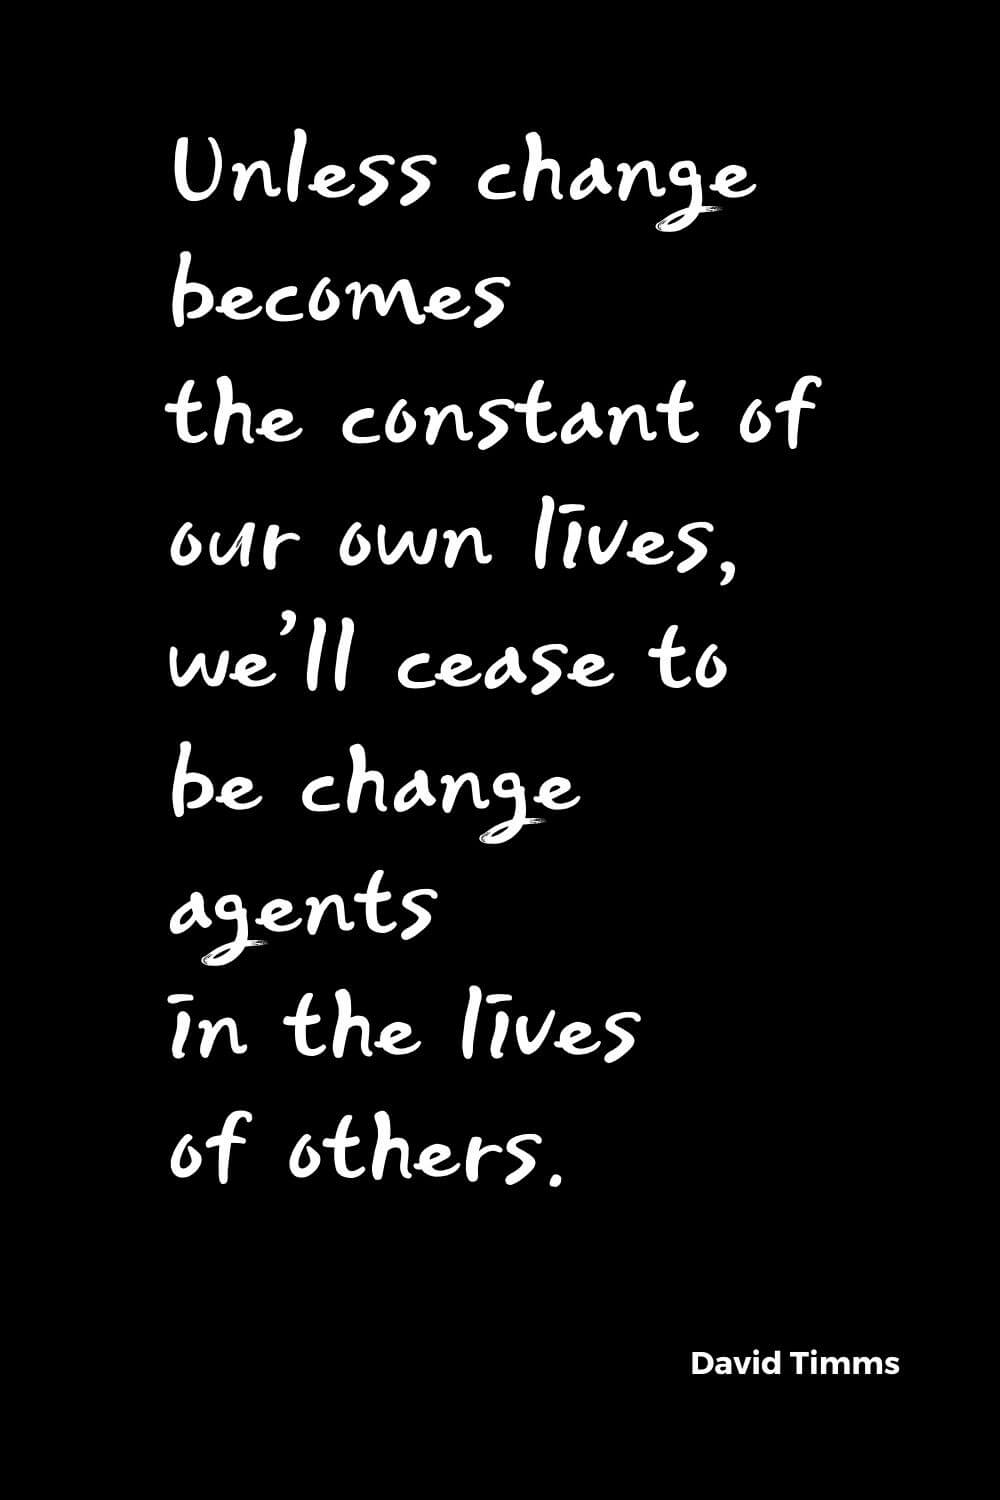 Quotes about Change (1): Unless change becomes the constant of our own lives, we'll cease to be change agents in the lives of others. David Timms